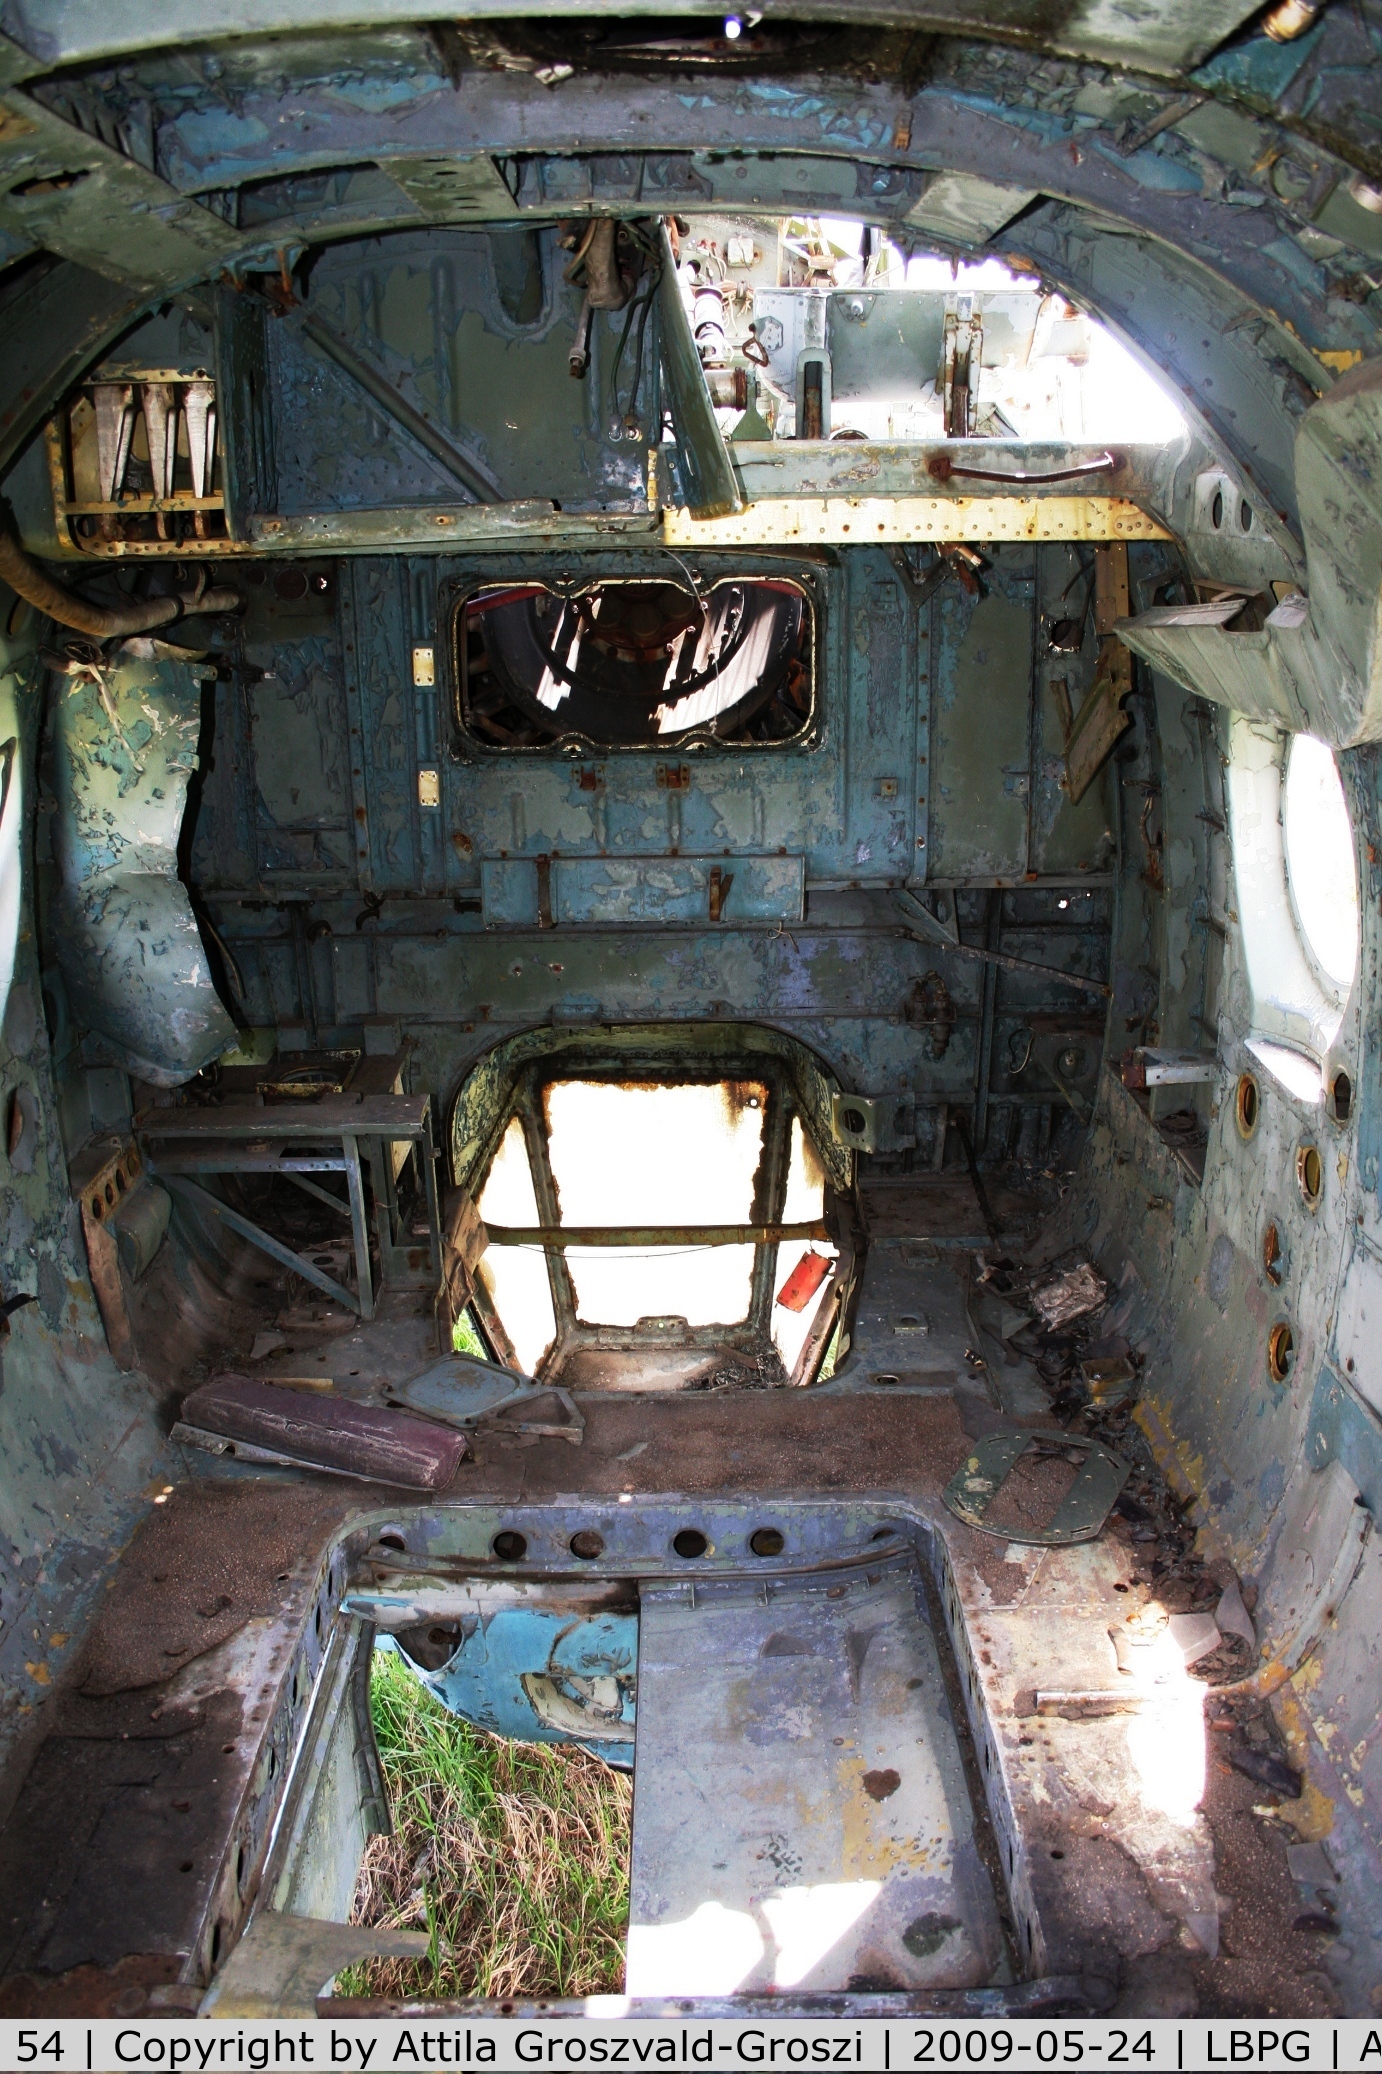 54, 1959 Mil Mi-4 C/N 12112, Bulgarian Museum of Aviation, Plovdiv-Krumovo (LBPG). In the inside of the helicopter, into the direction of the cockpit.